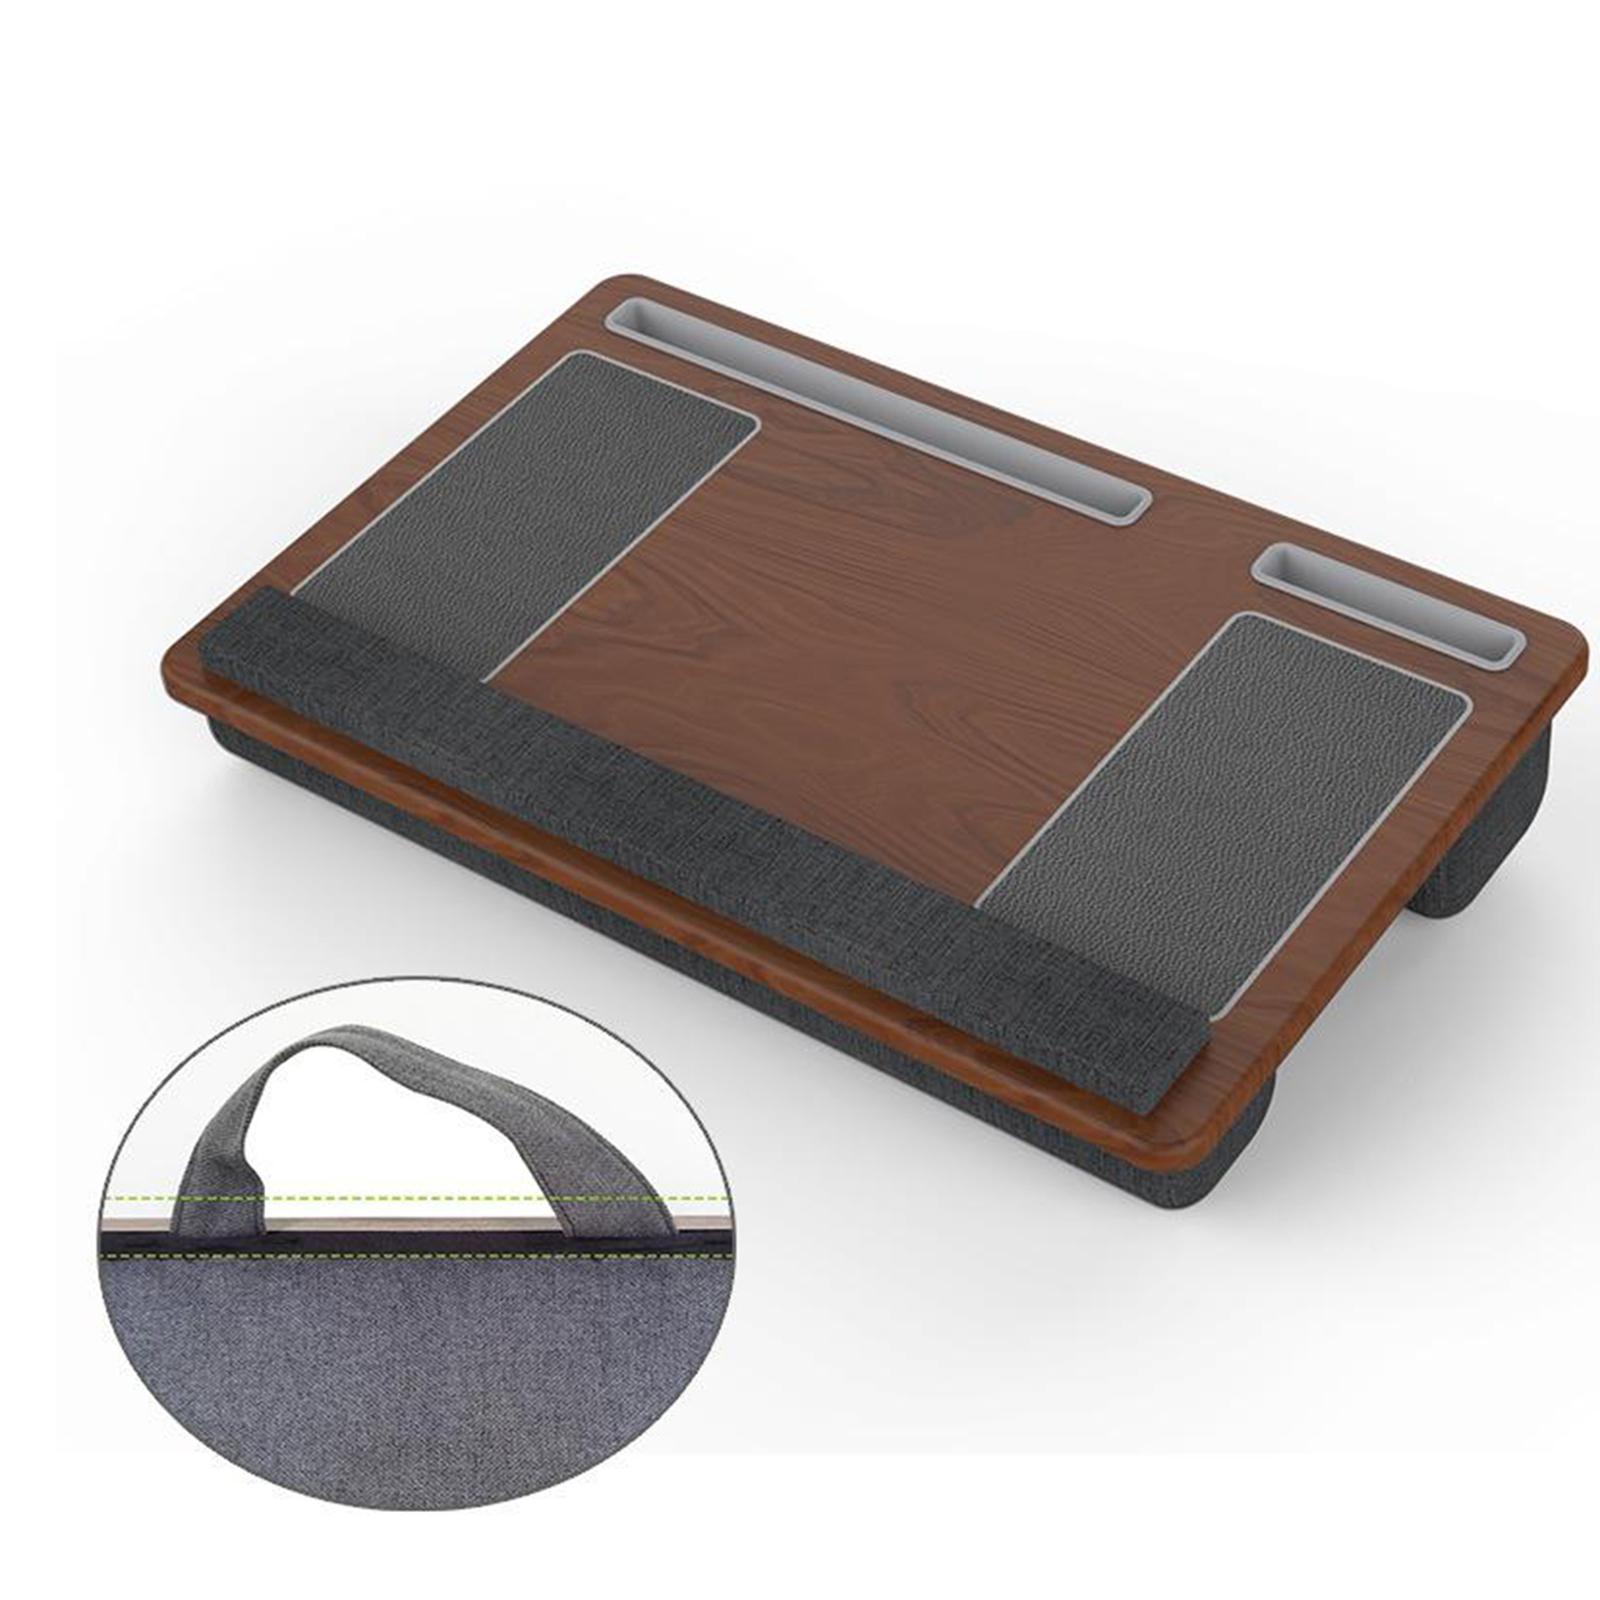 Hình ảnh Computer Laptop Table Stand with Wrist Rest  Brown